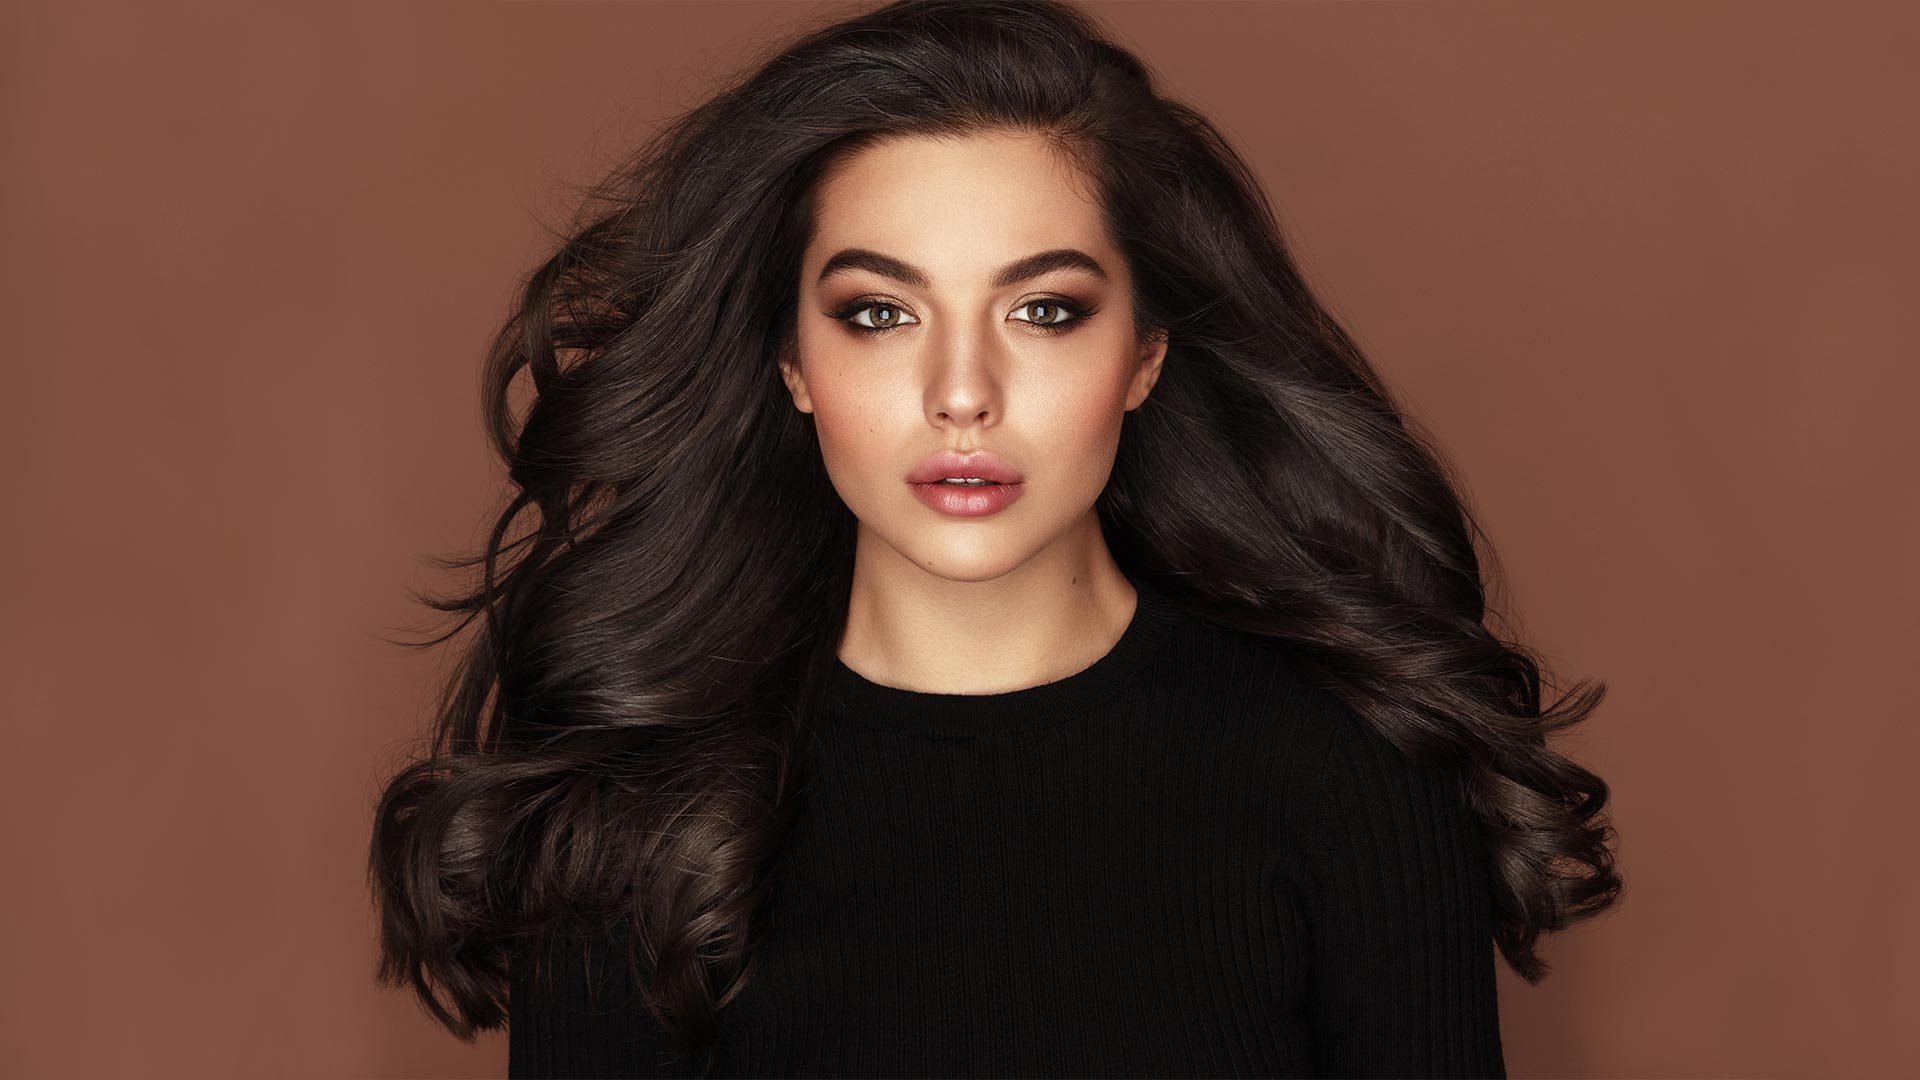 Loreal Paris Article 26 Dark Hair Colors That Are Seriously Stunning D